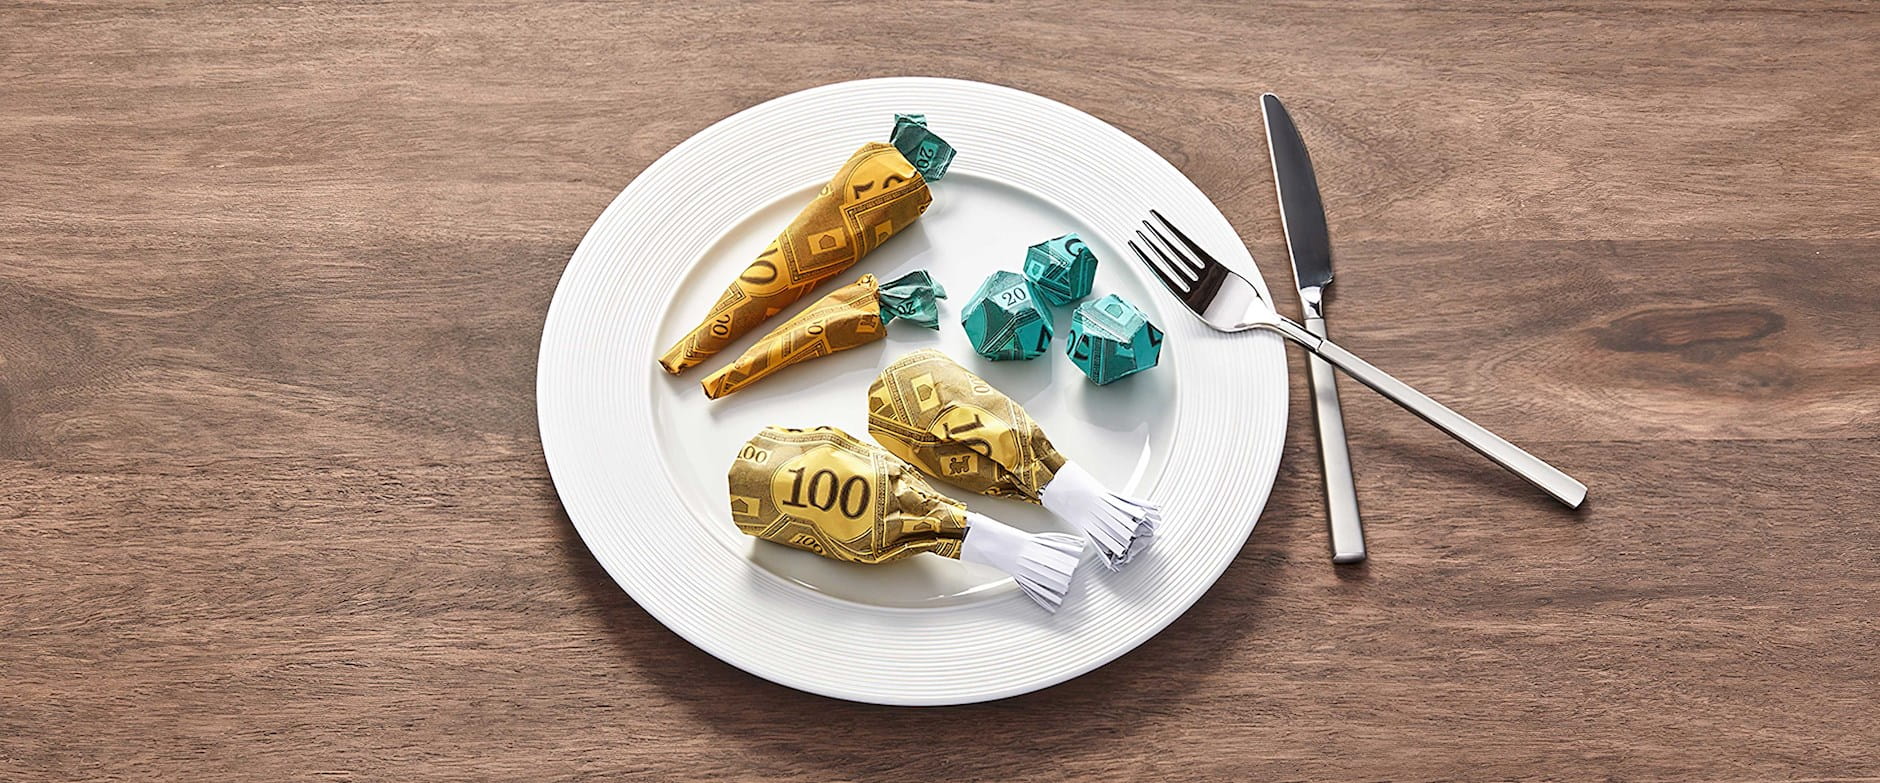 Dinner plate with food made of money